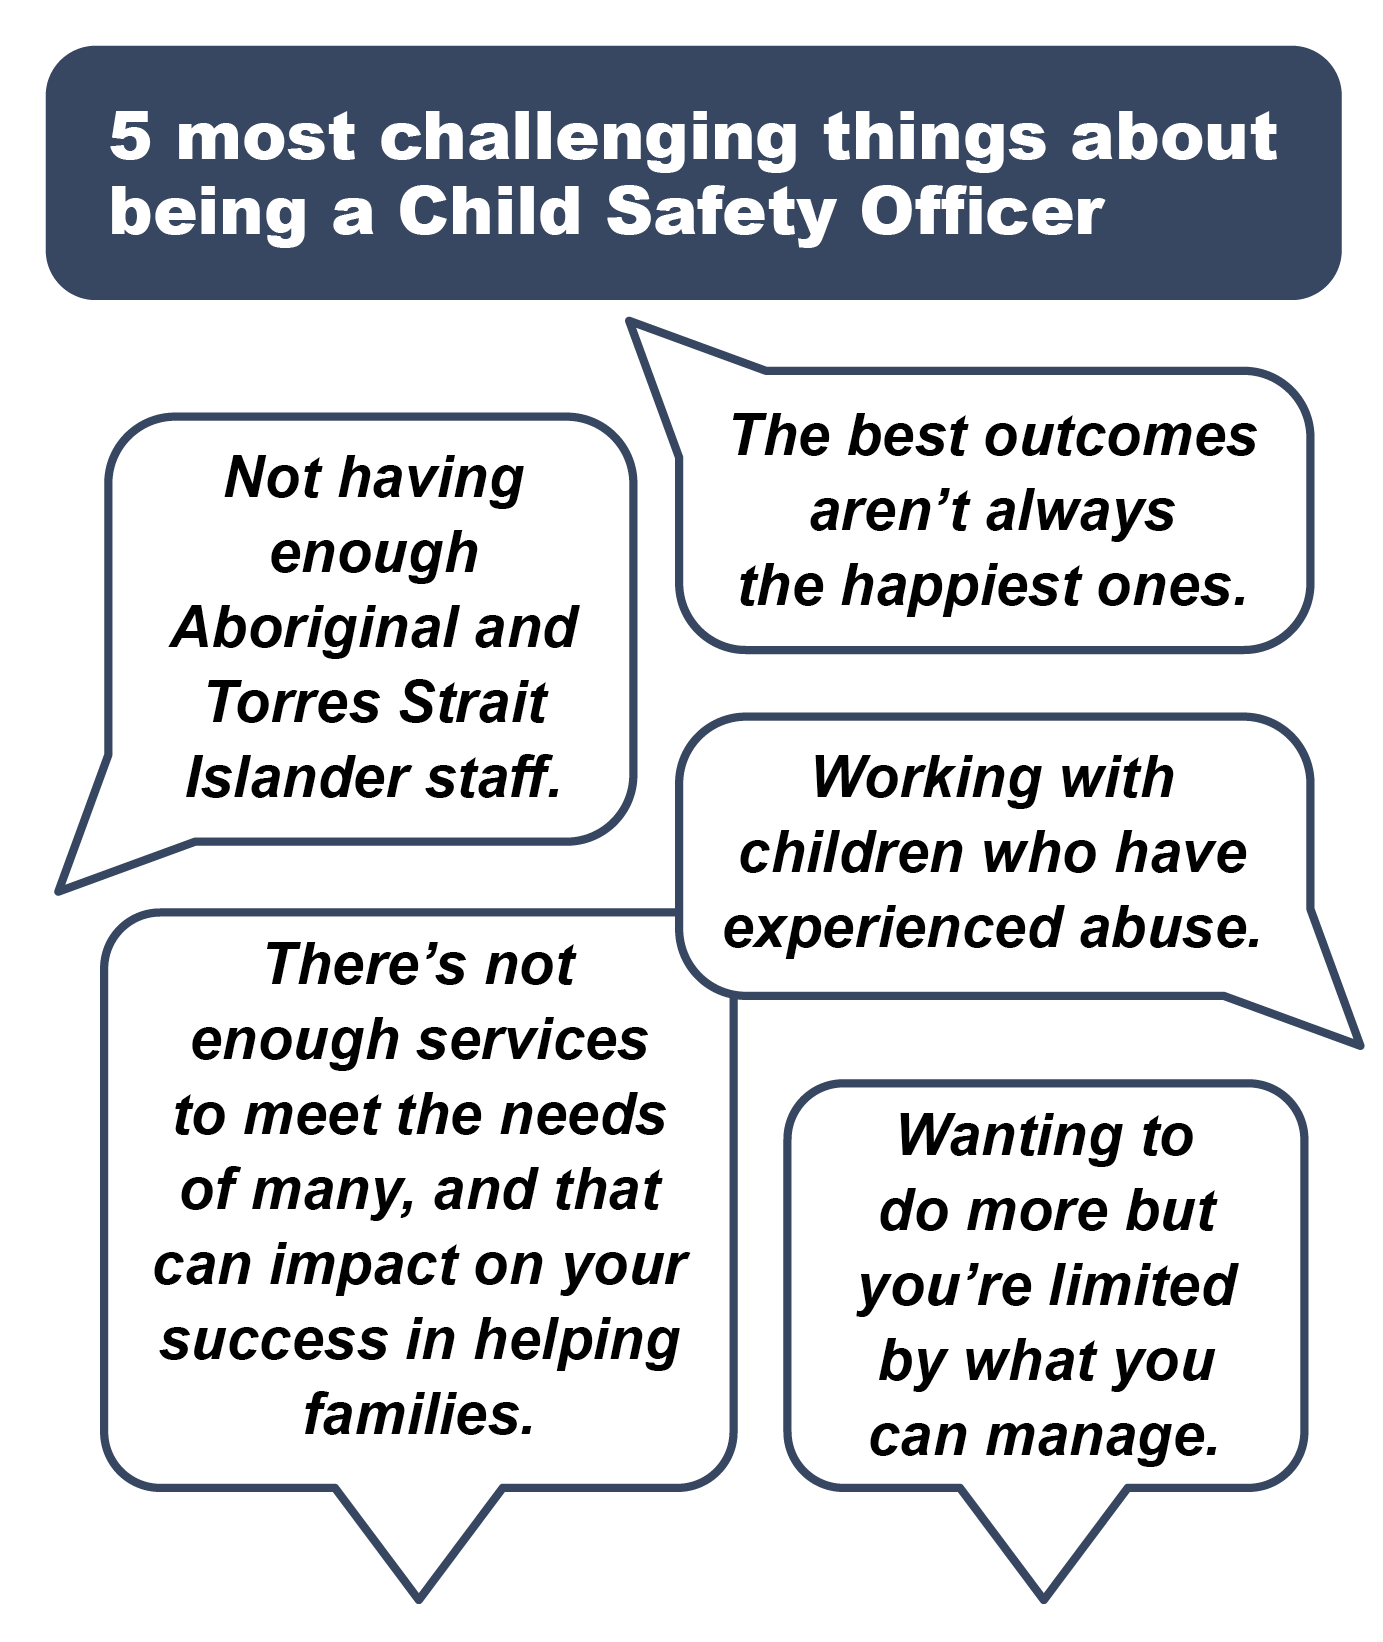 5 most challenging things about being a Child Safety Officer: 1) The best outcomes aren't always the happiest ones. 2) Not having enough Aboriginal and Torres Strait Islander staff. 3) Working with children who have experienced abuse. 4) There's not enough services to meet the needs of many, and that can impact on your success in helping families. 5) Wanting to do more but you're limited by what you can manage.